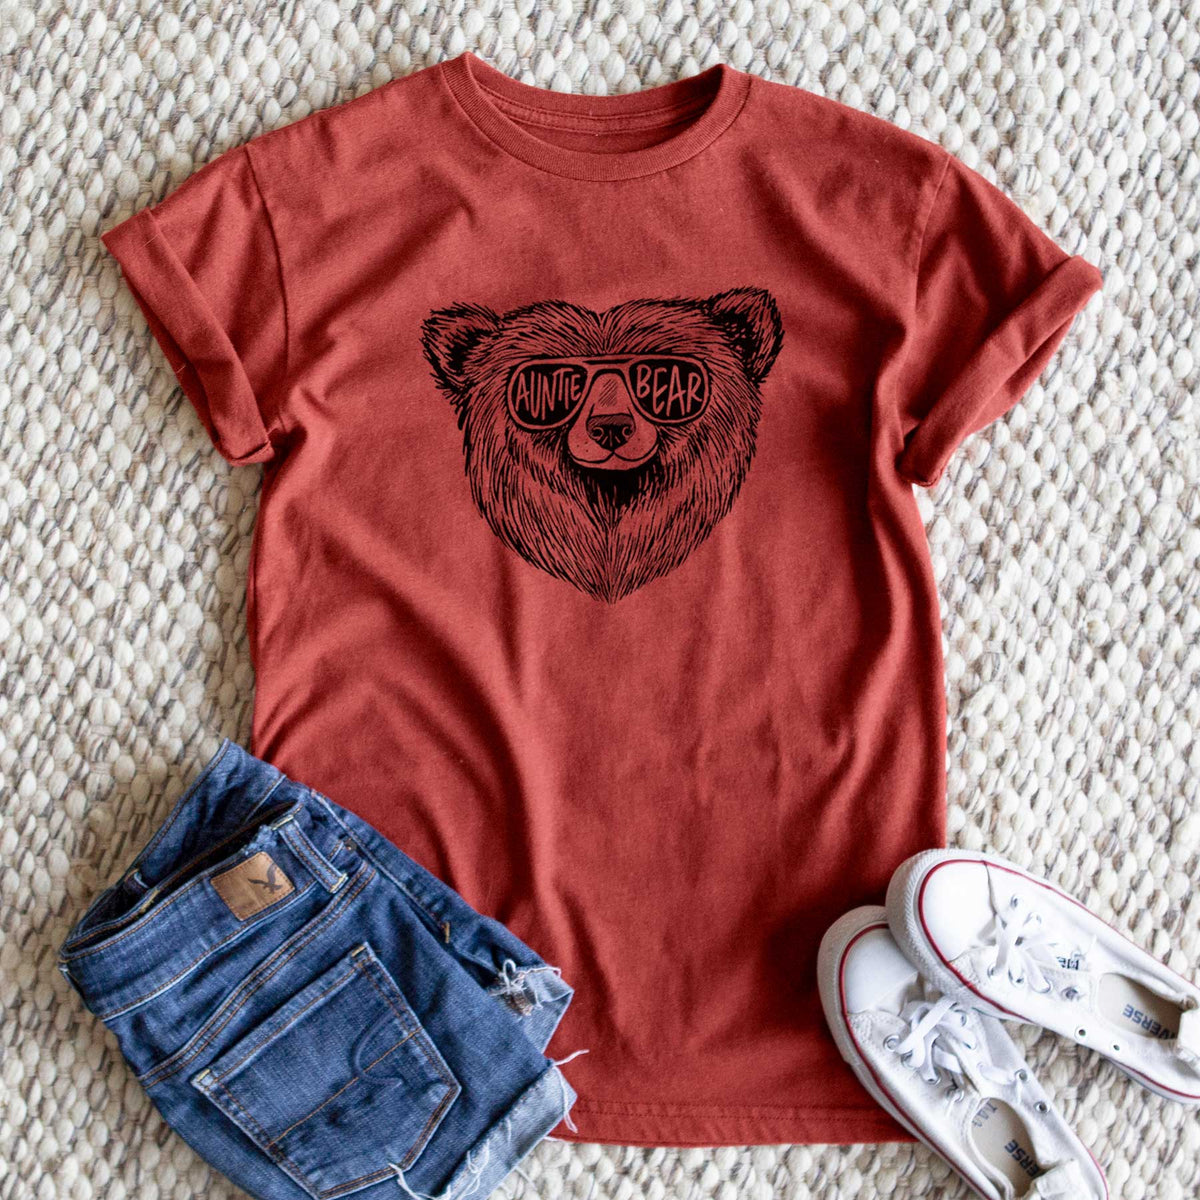 Auntie Bear - Unisex Recycled Eco Tee  - CLOSEOUT - FINAL SALE